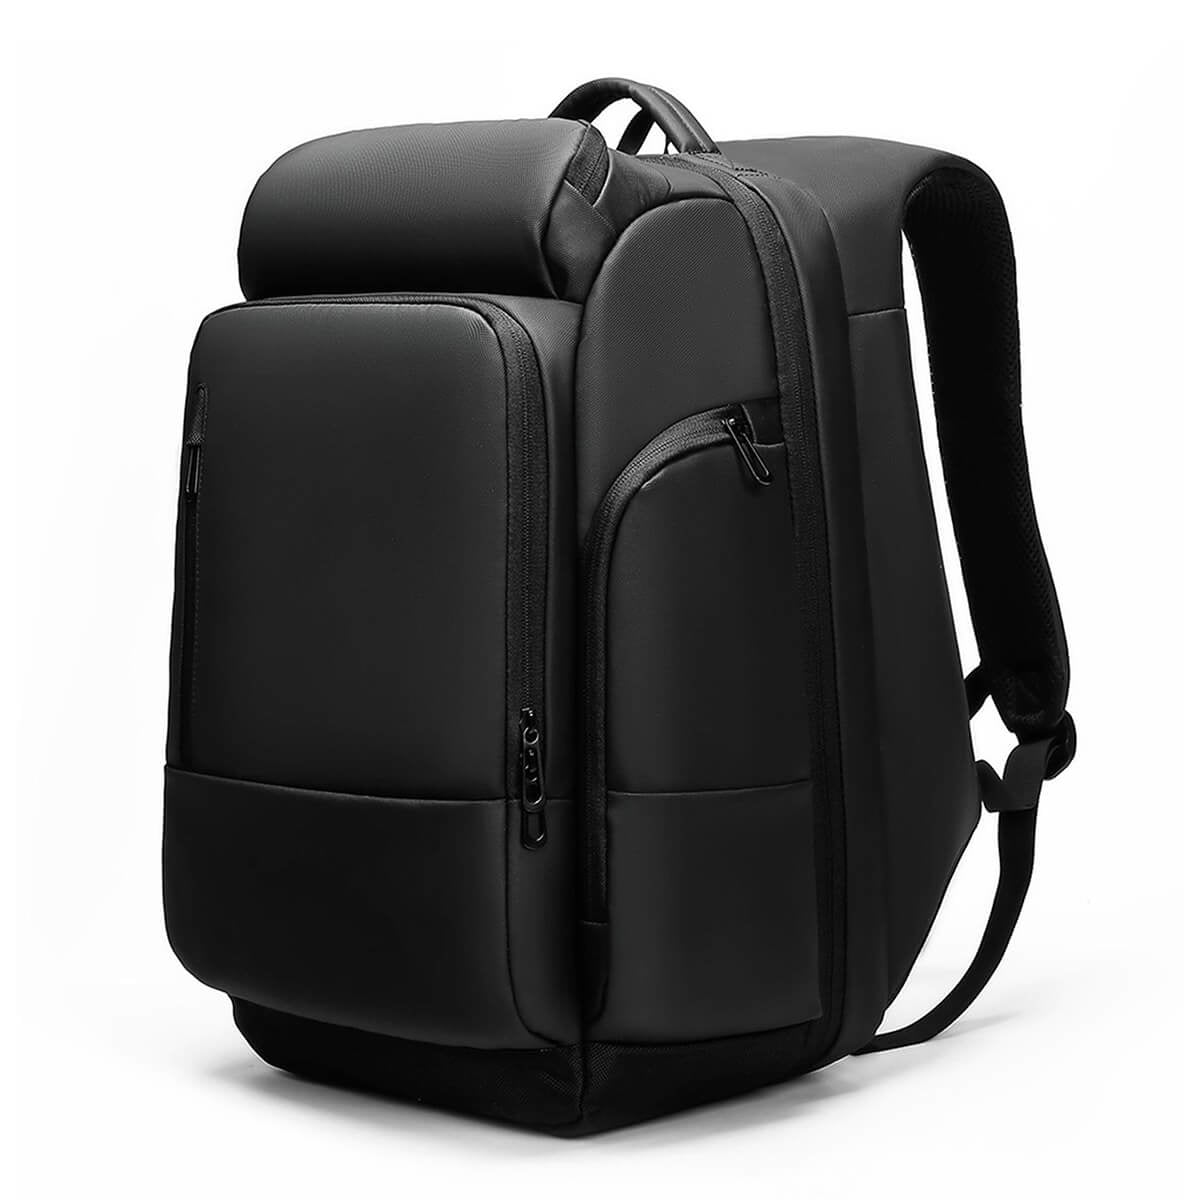 Large Waterproof Laptop Backpack with USB Charging Port